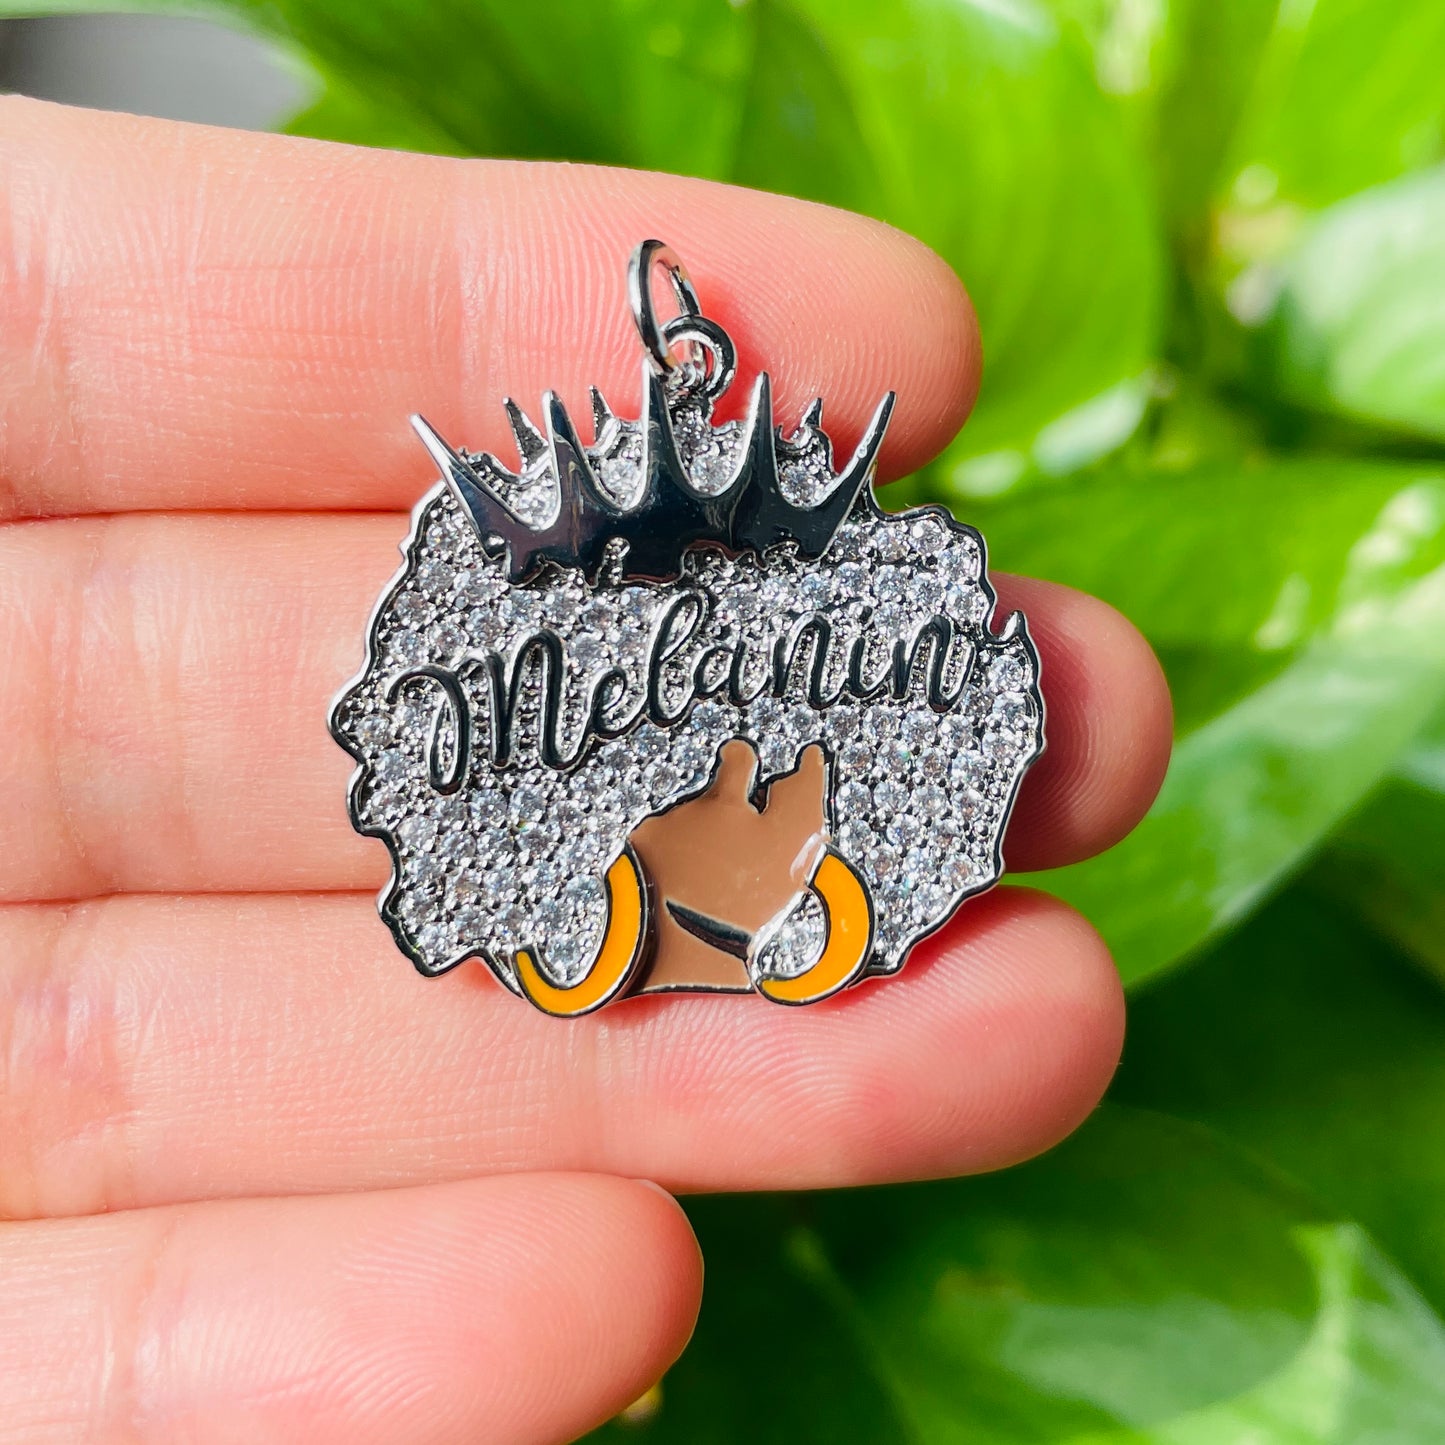 10pcs/lot 29*29mm CZ Paved Crown Queen Melanin Afro Girl Charms Silver CZ Paved Charms Afro Girl/Queen Charms Charms Beads Beyond